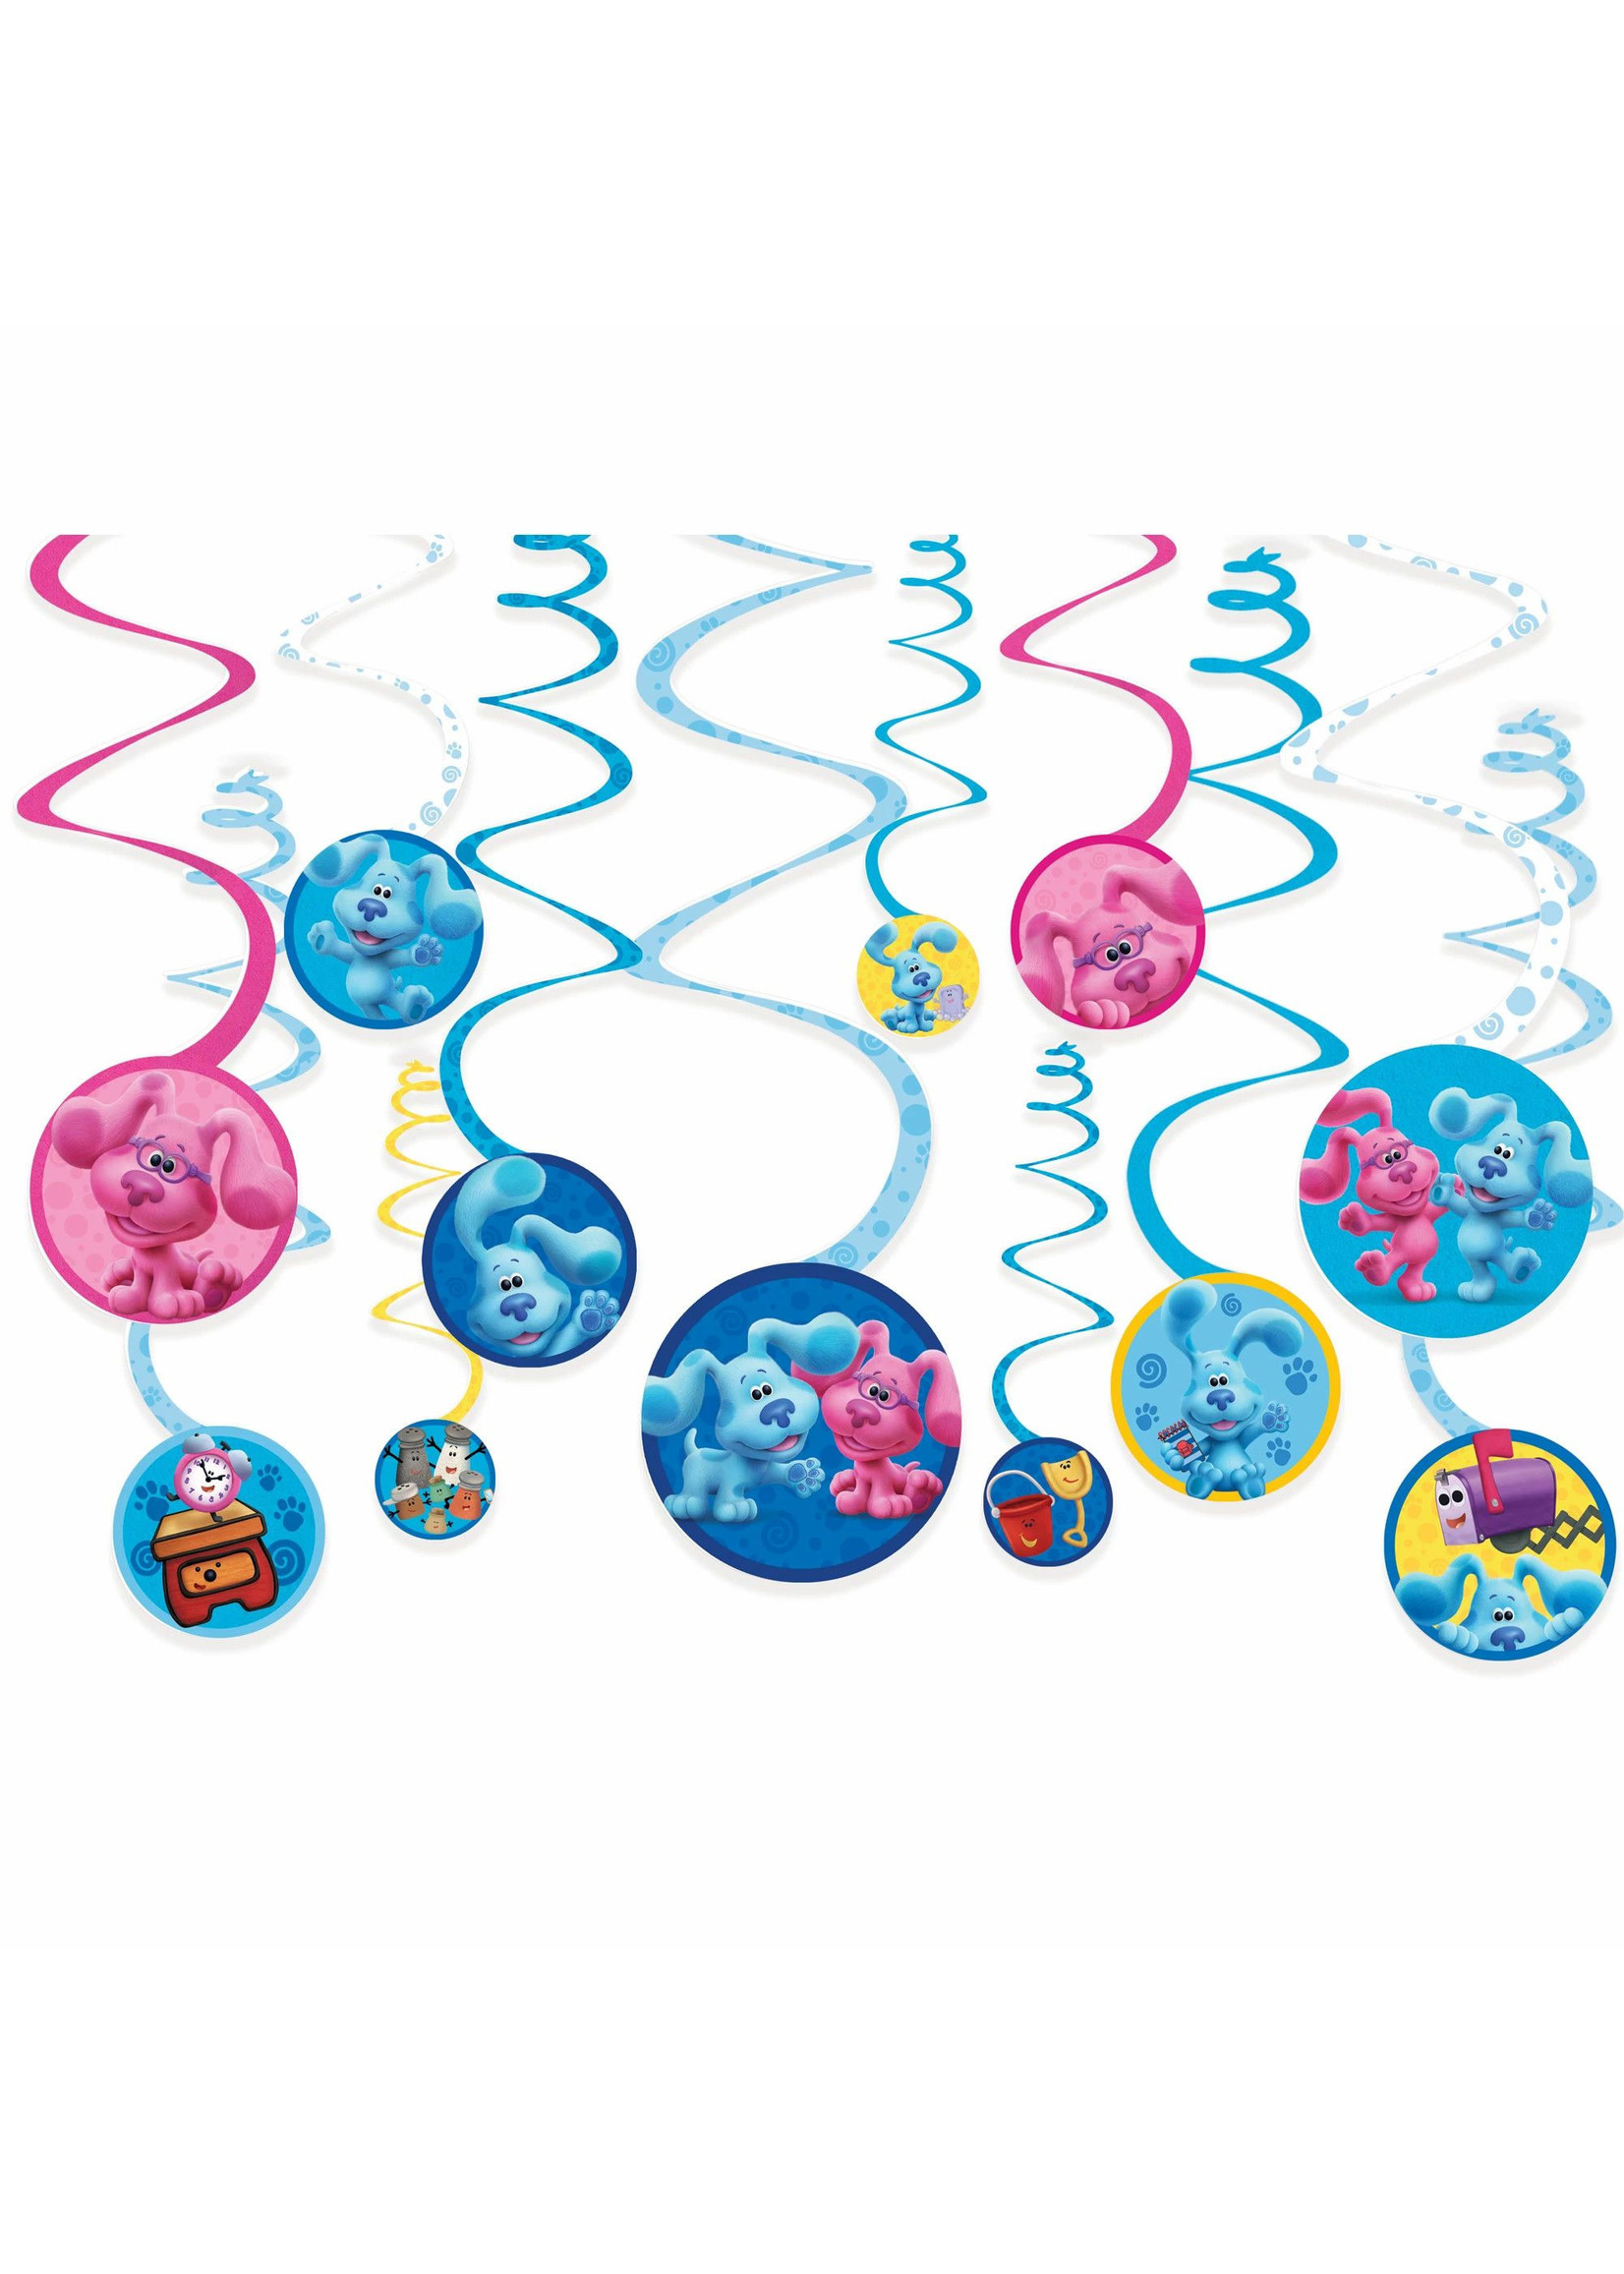 Blues Clues Spiral Decorations -12ct